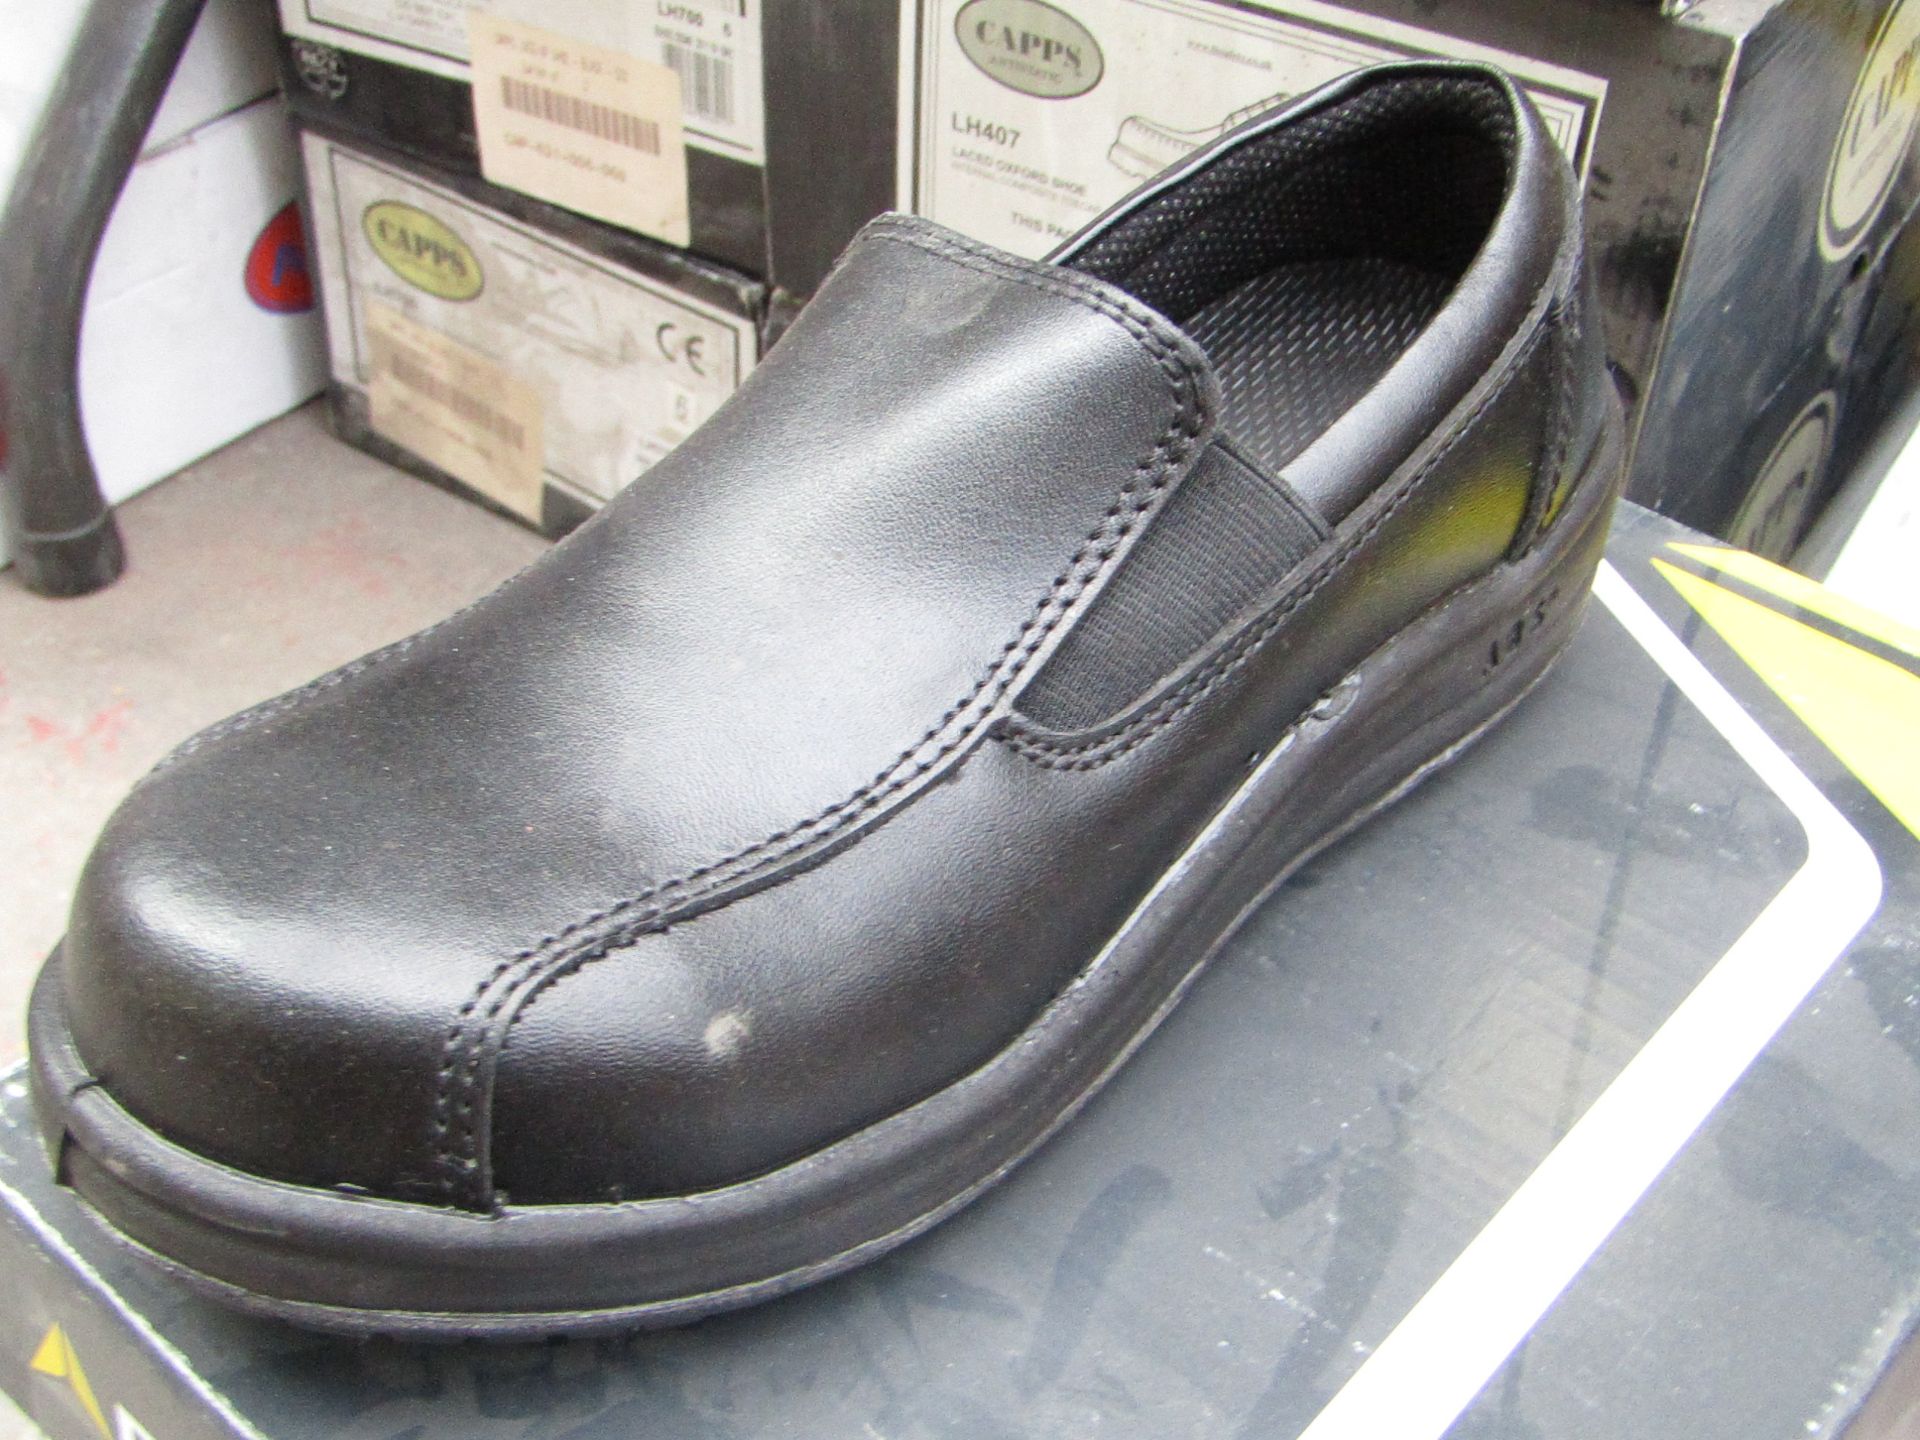 Delta Plus composite steel toe cap Shoes, size 3, new and boxed.